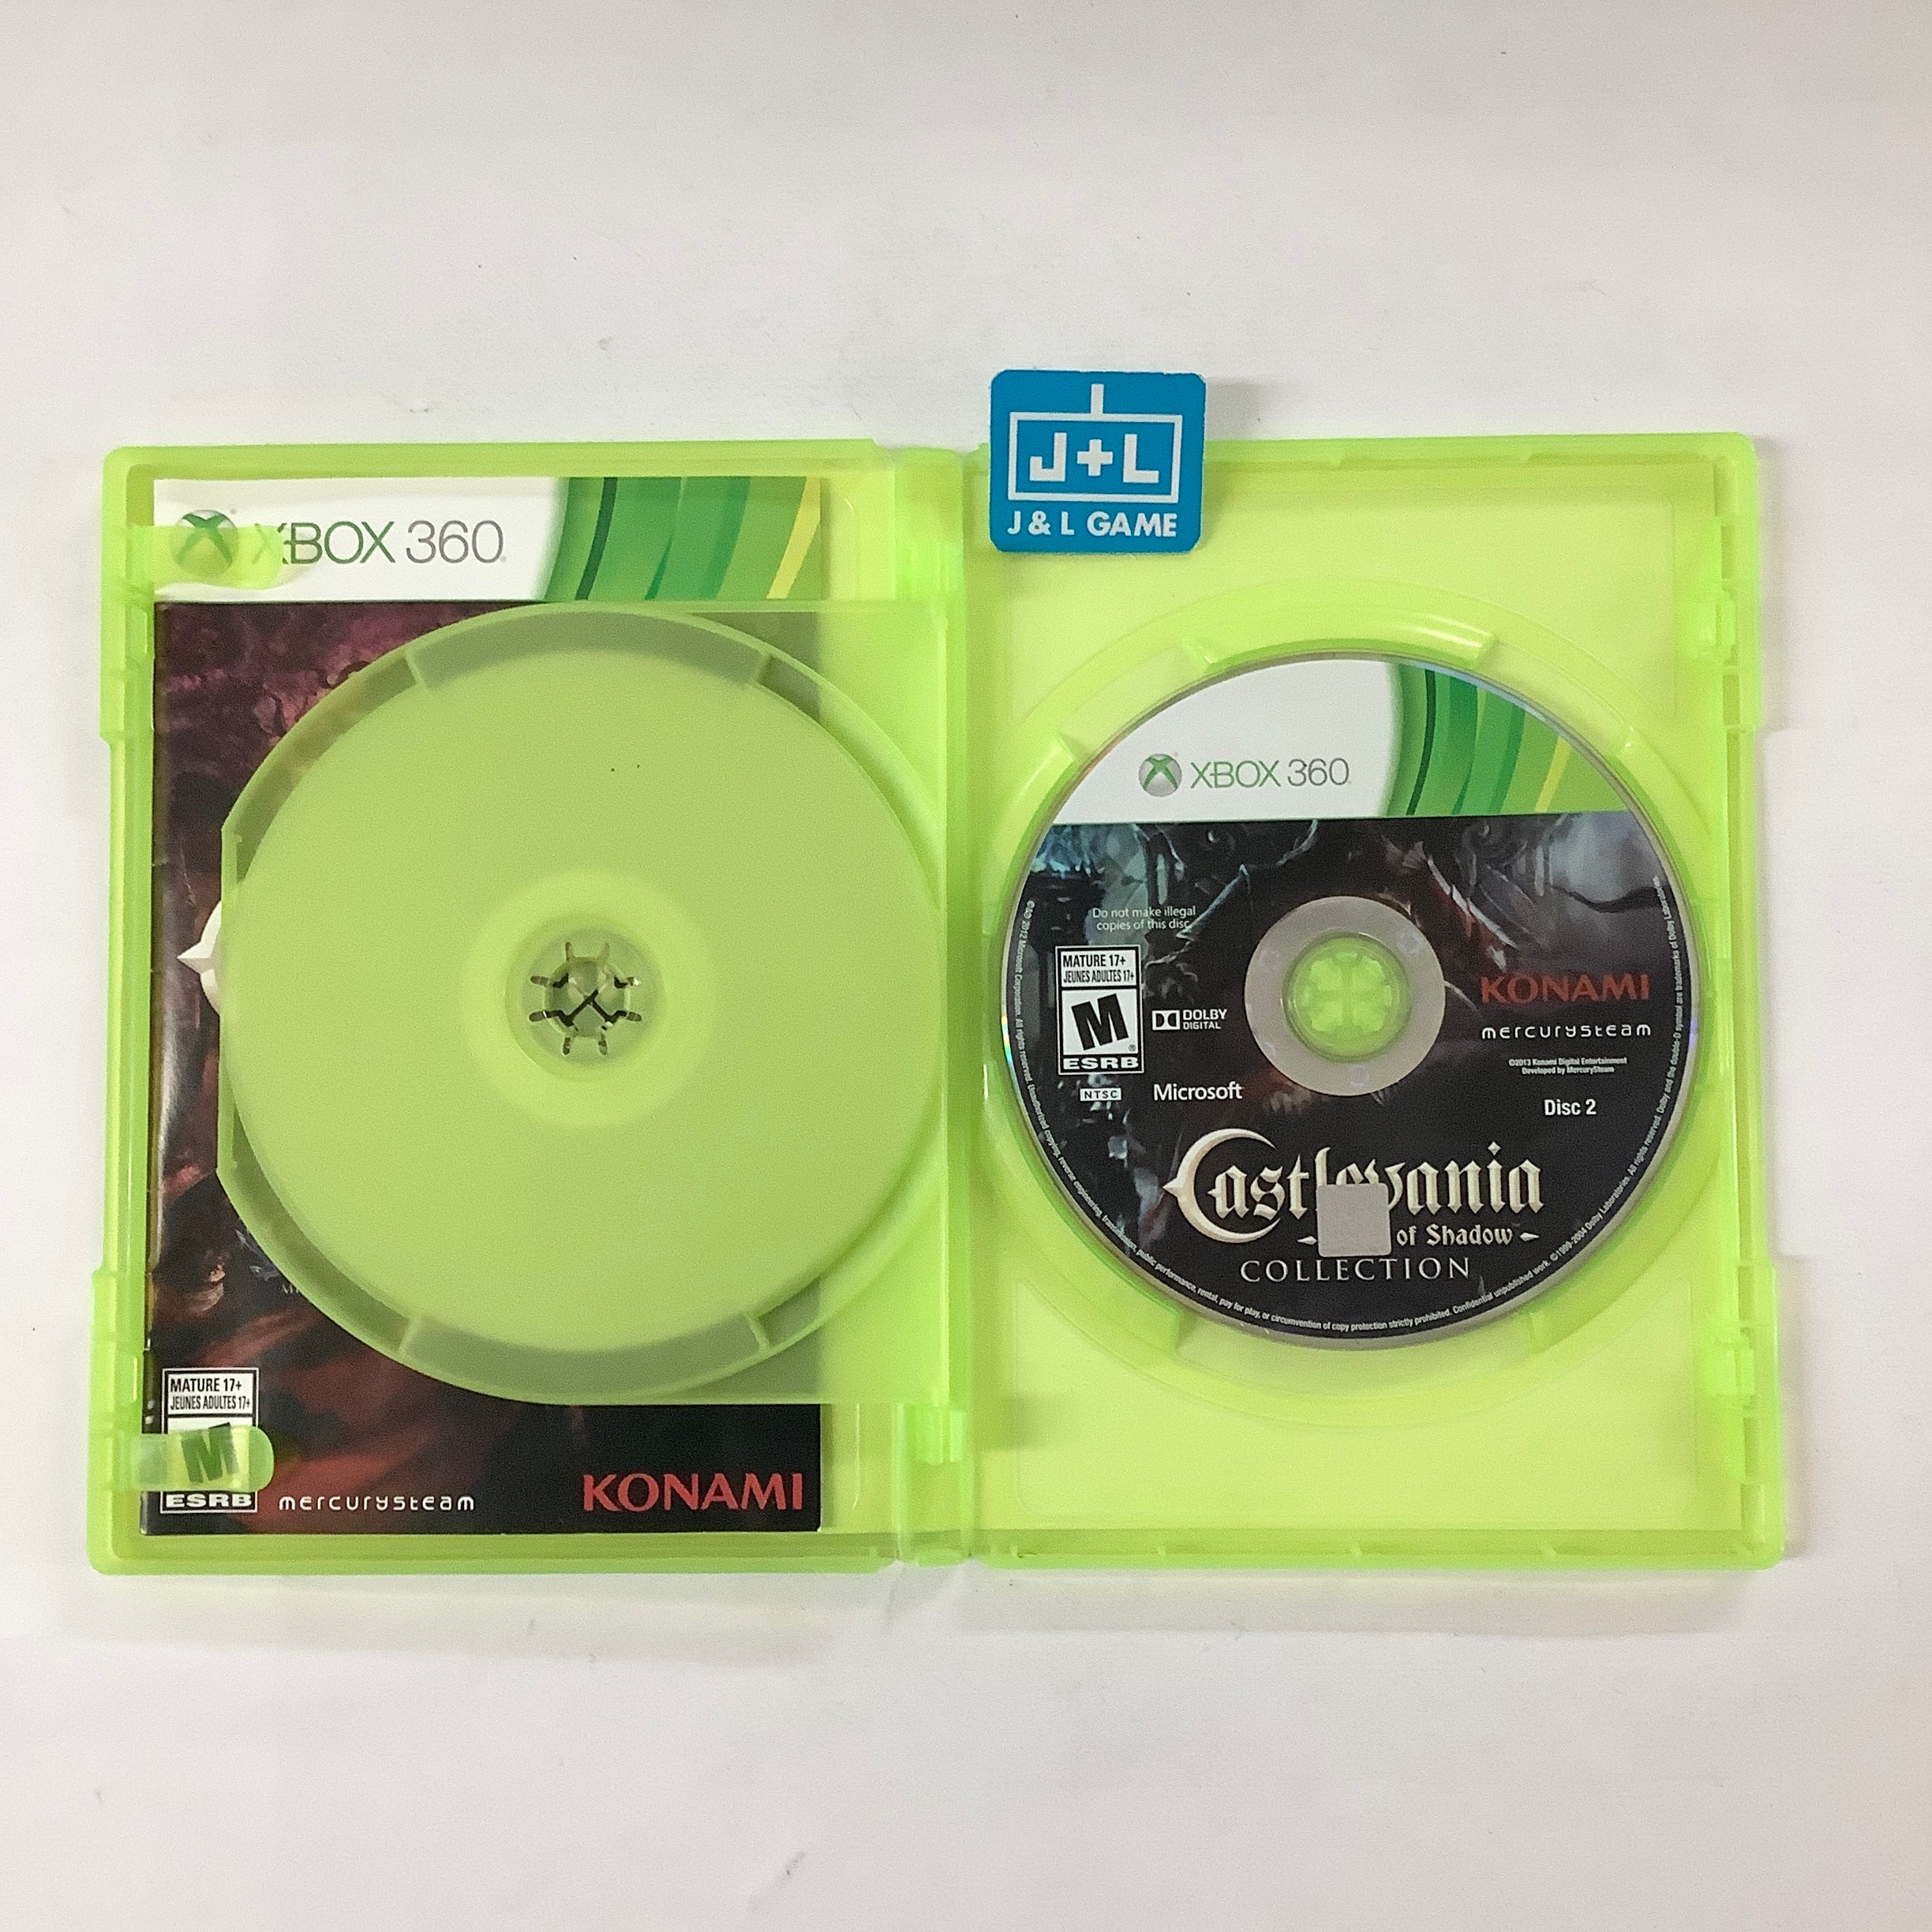 Castlevania Lords of Shadow Collection - XBox 360 [Pre-Owned] Video Games Konami   